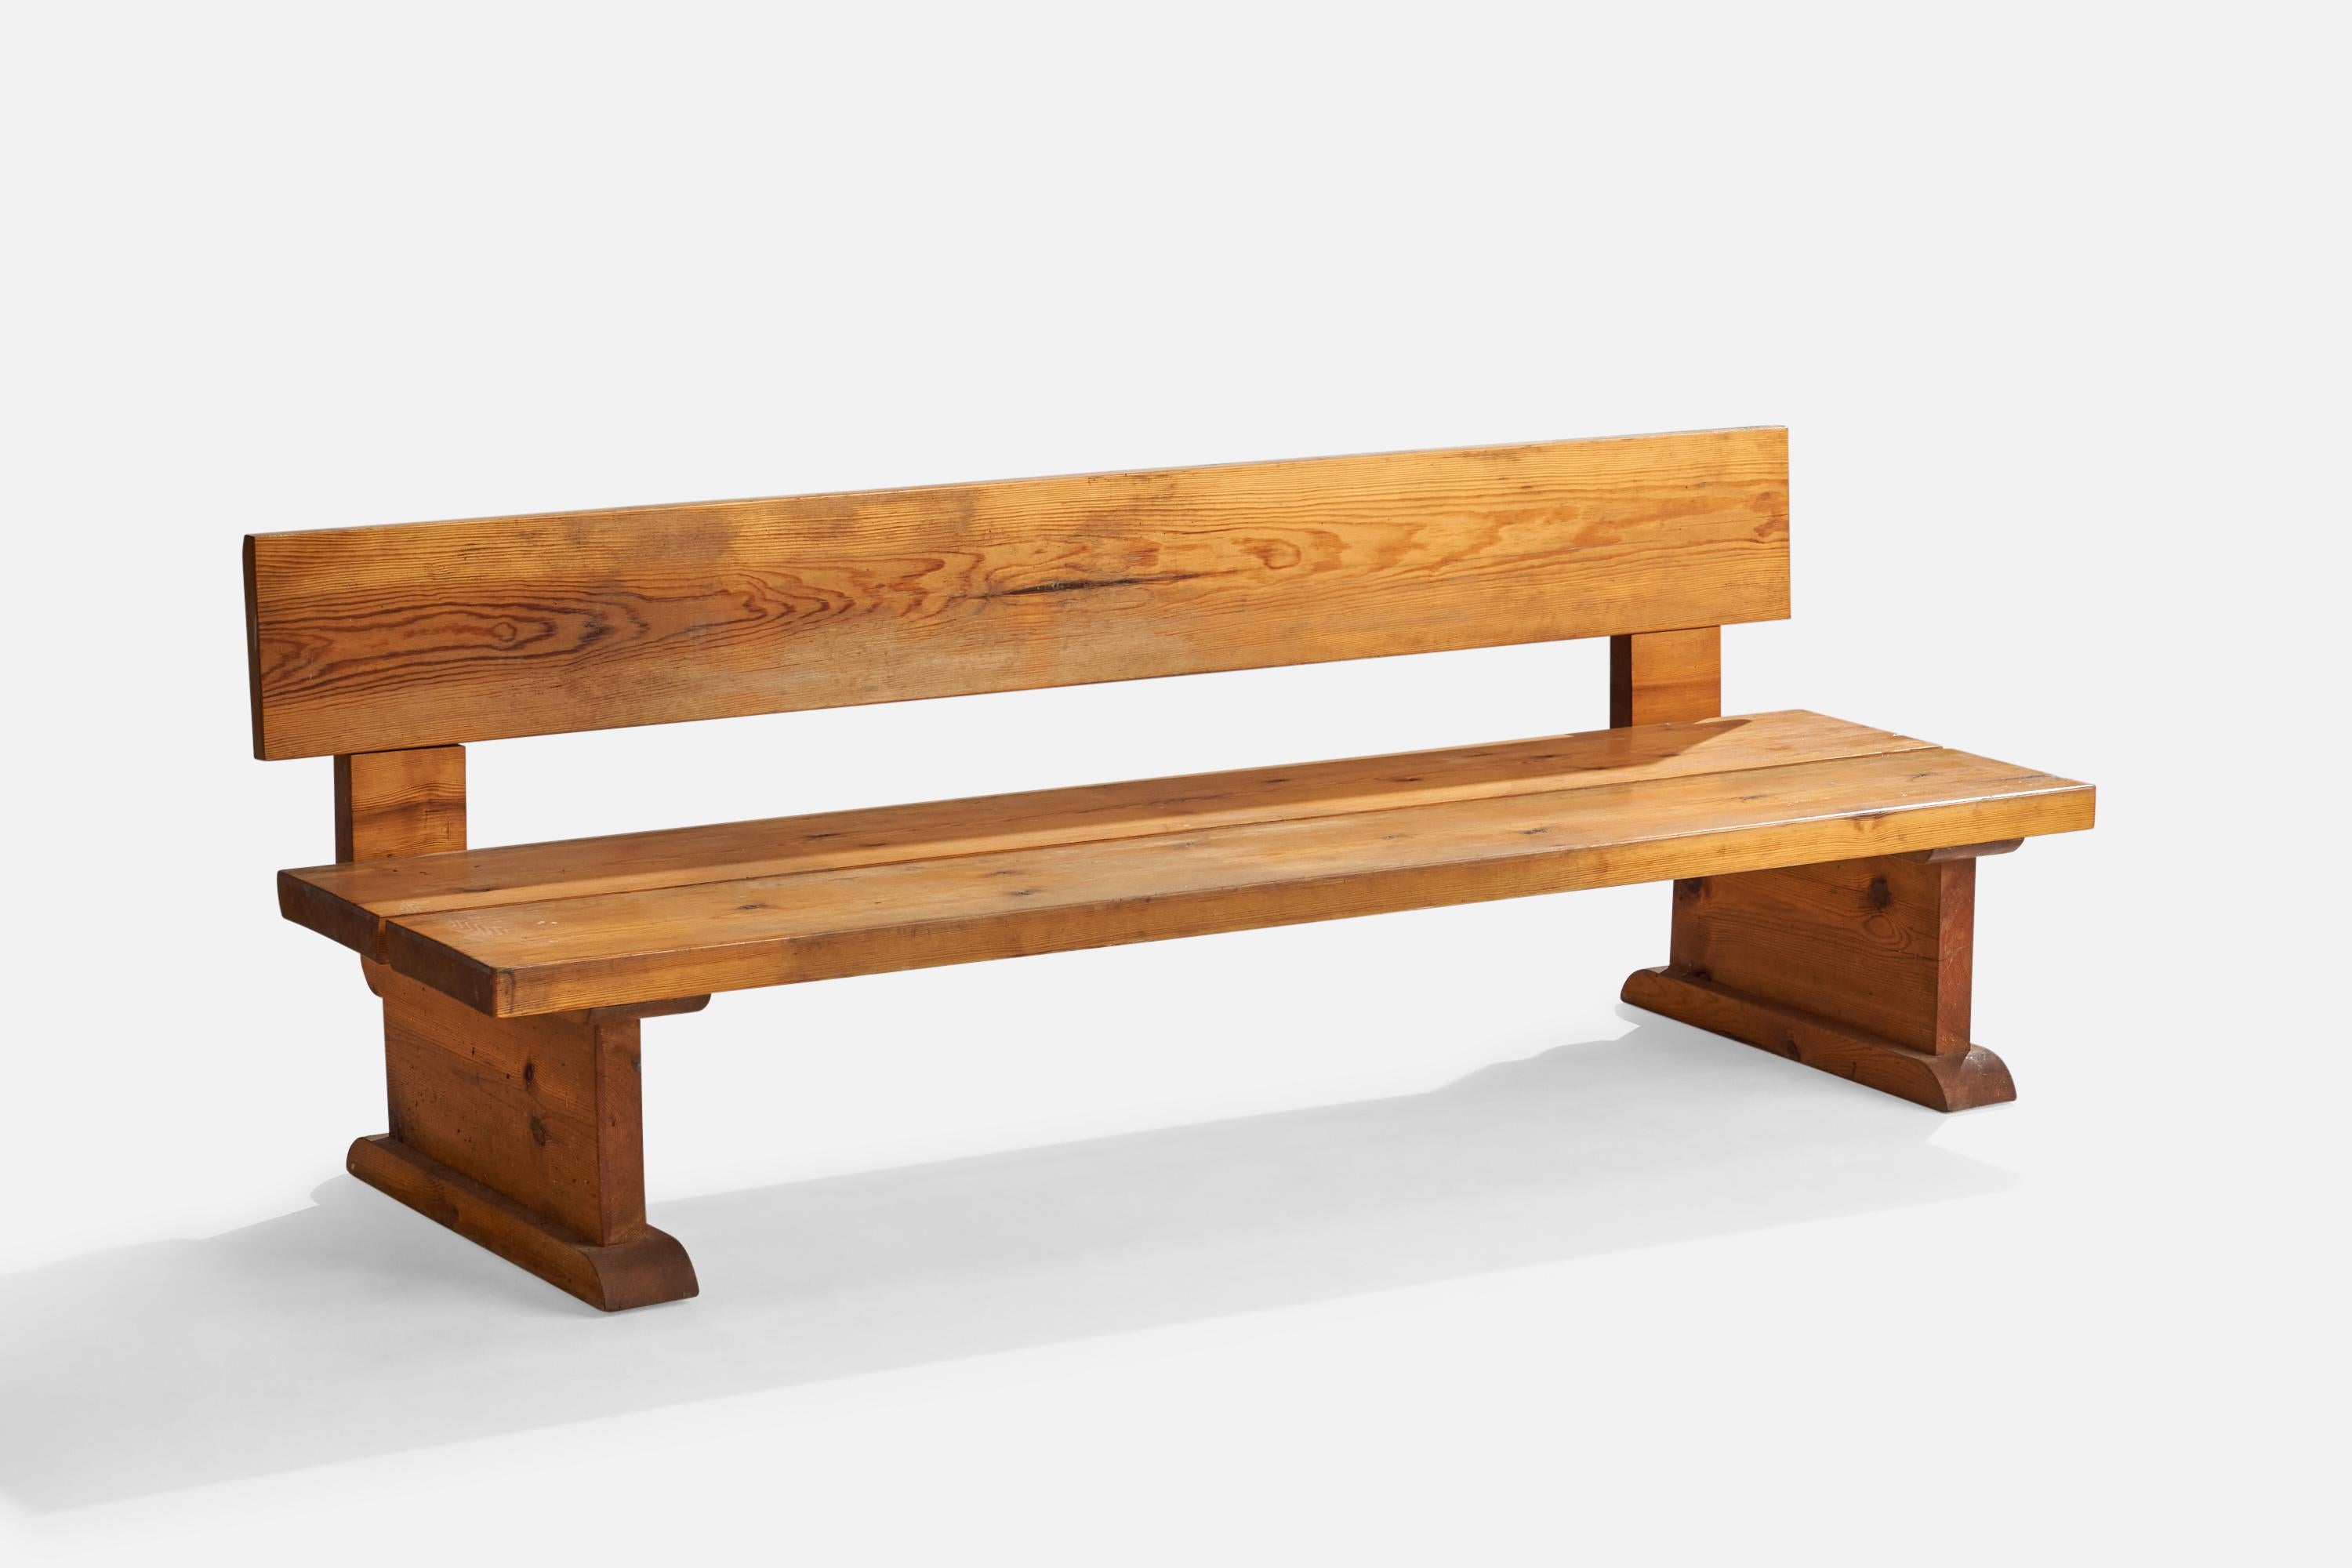 A sizeable low pine bench designed and produced in Finland, c. 1970s.

Seat height 13.5”